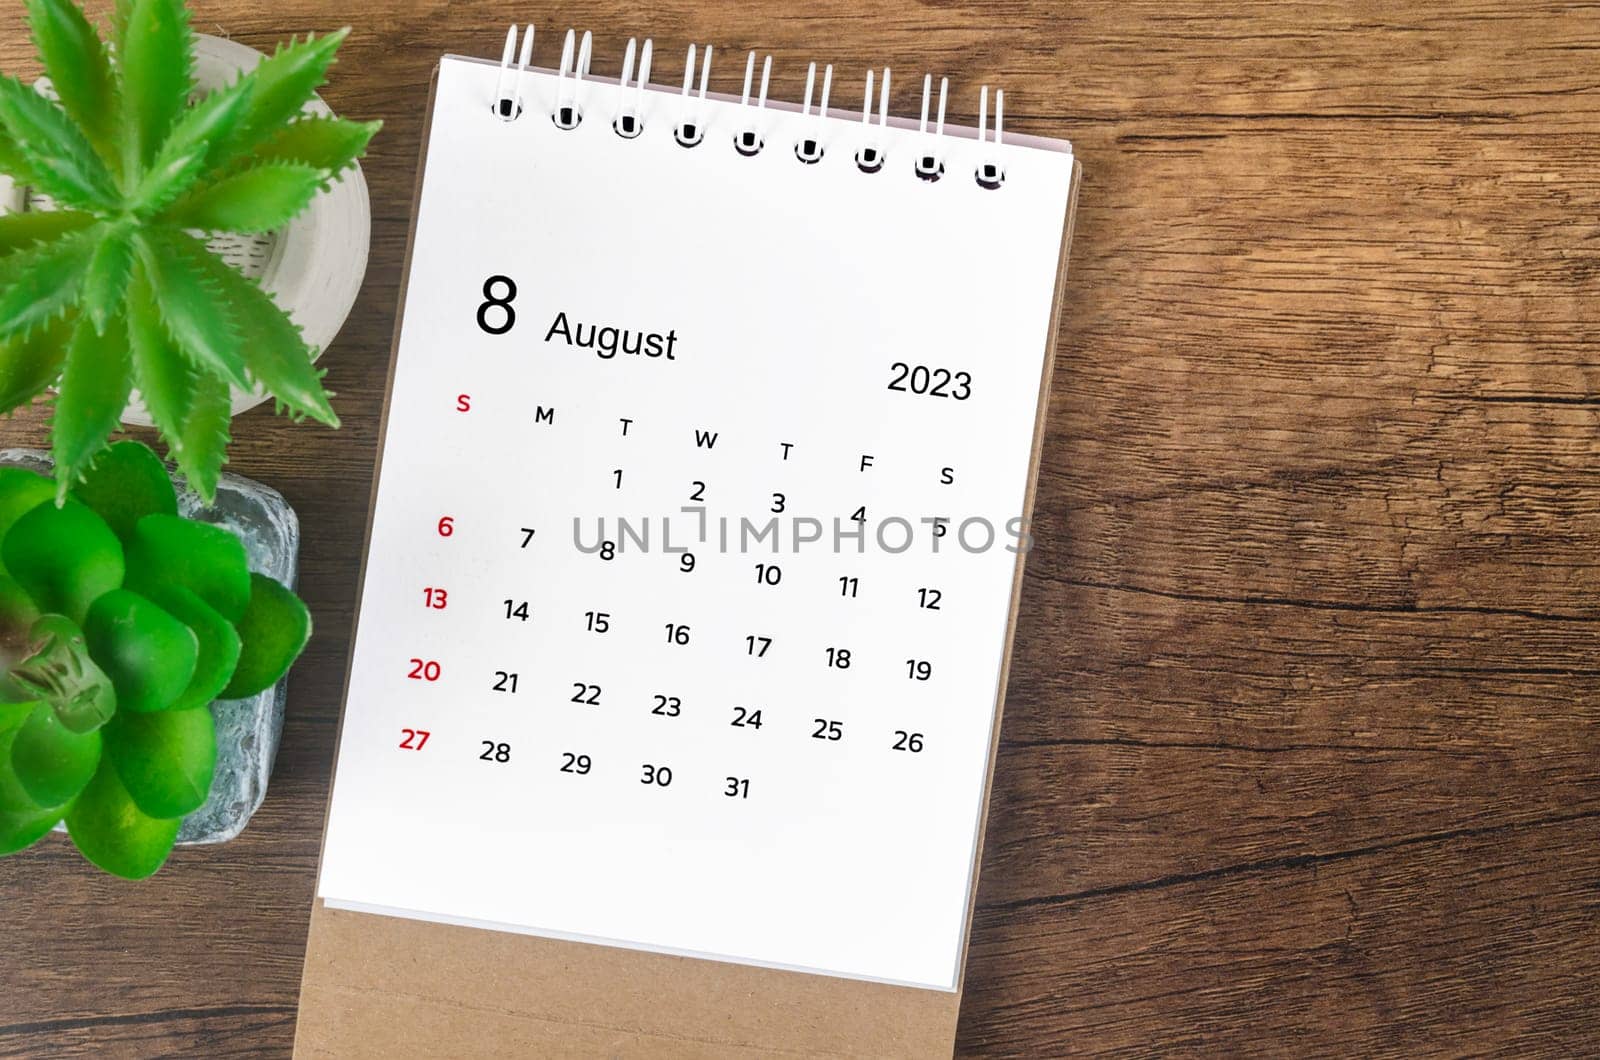 The August 2023 desk calendar for 2023 on wooden background. by Gamjai